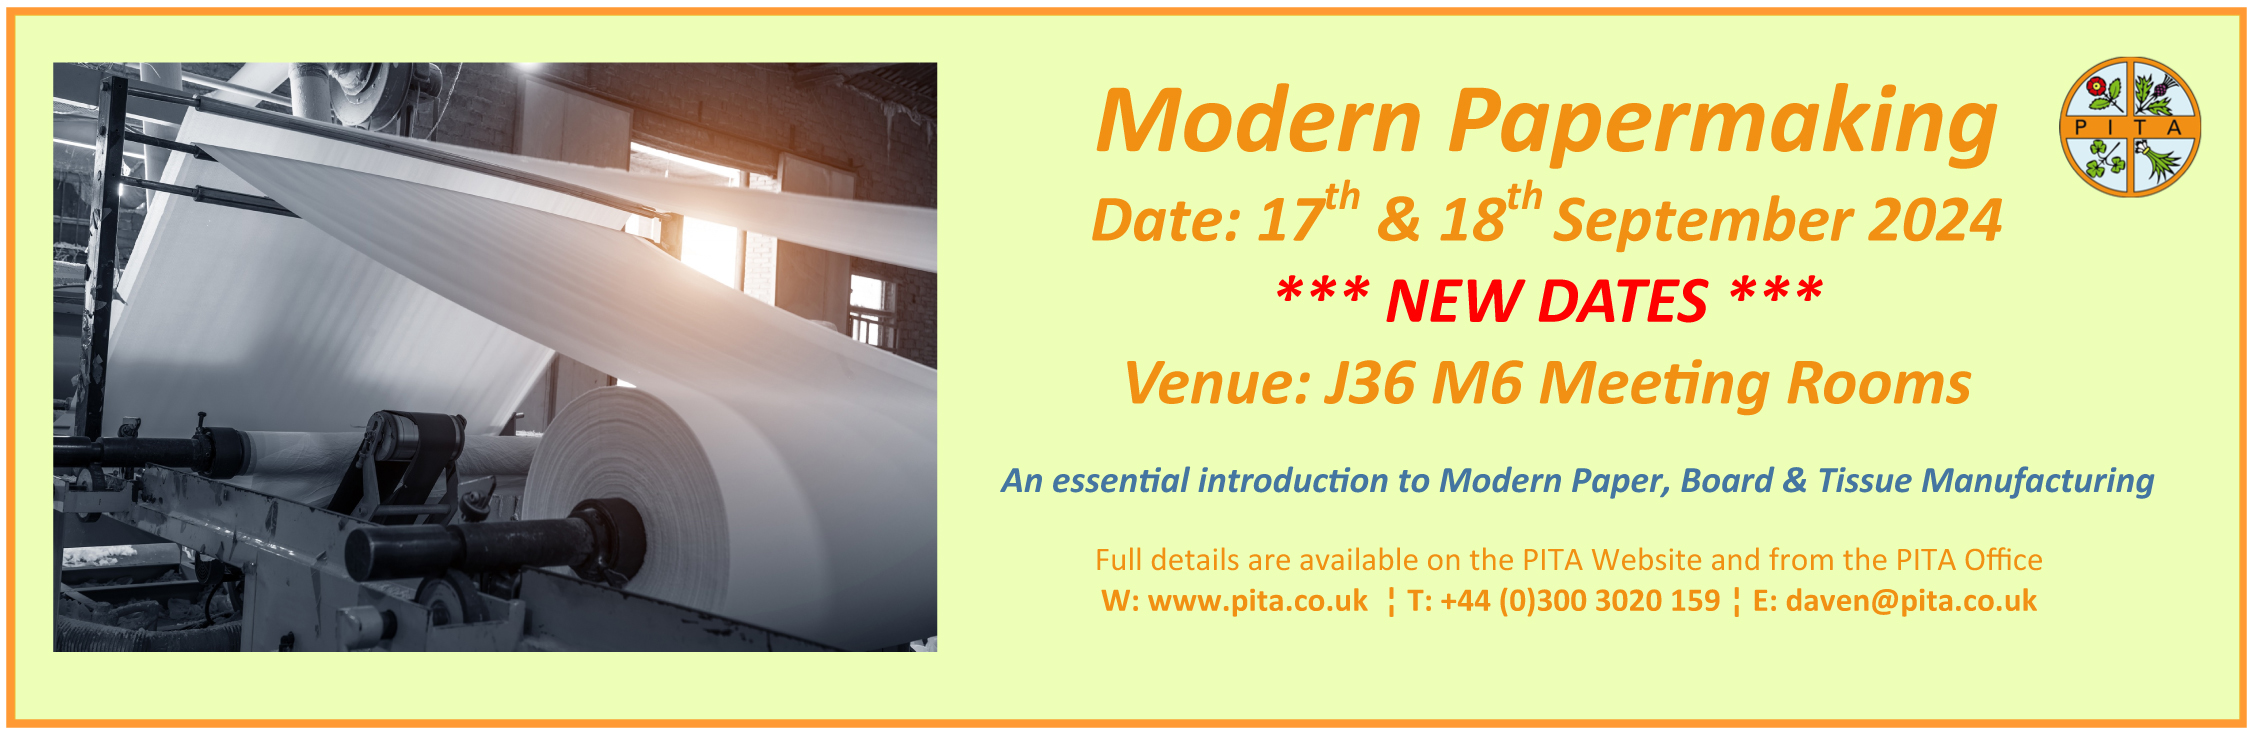 Modern Papermaking Course Sept 2024